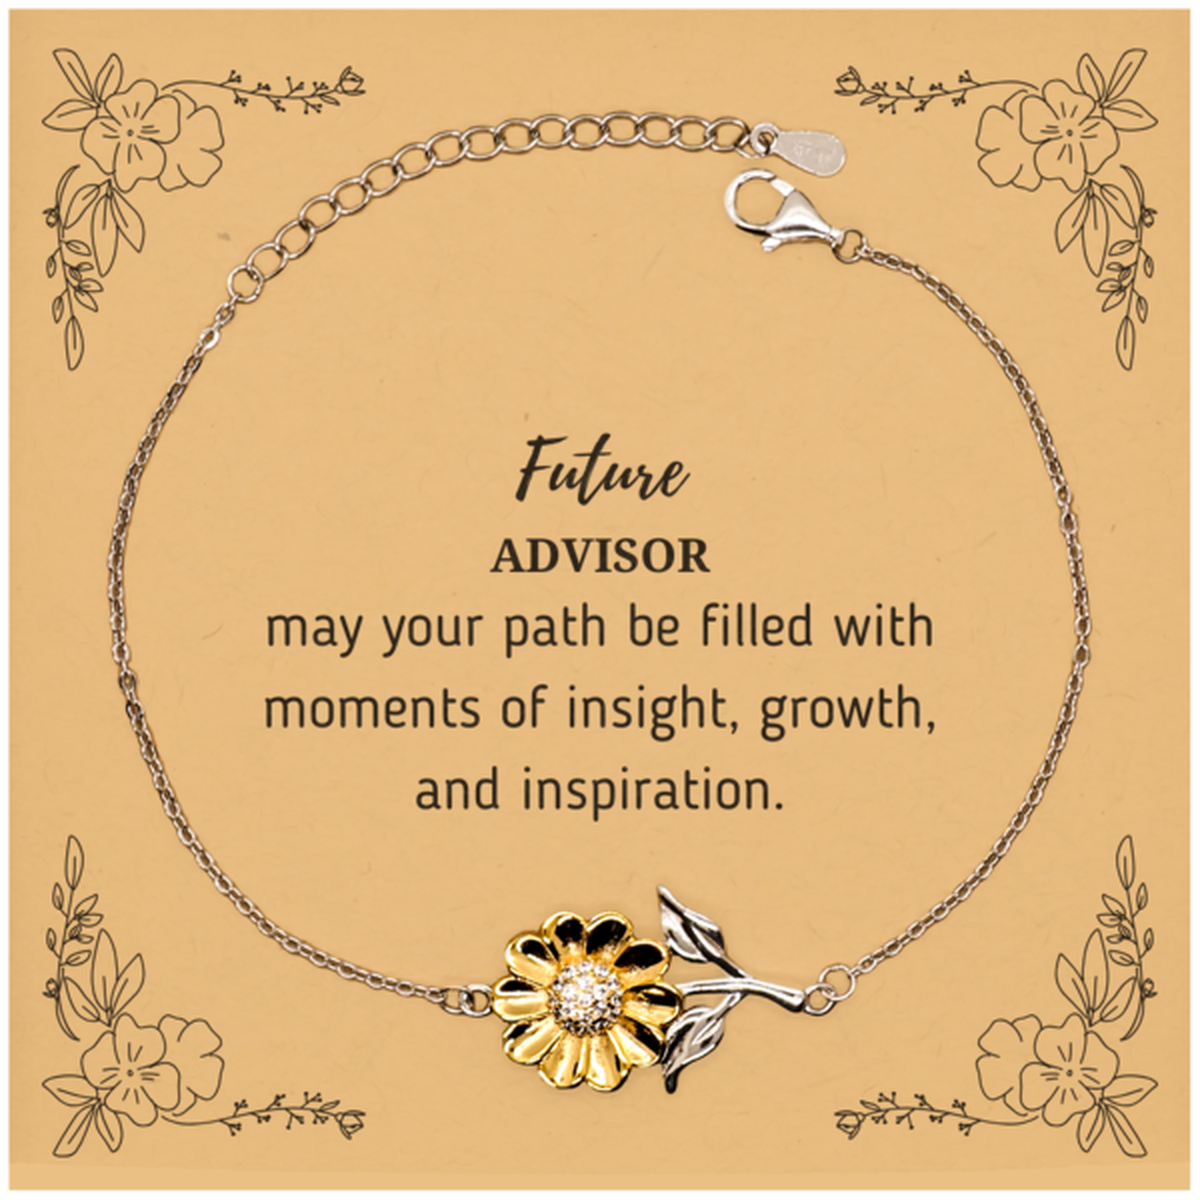 Future Advisor Gifts, May your path be filled with moments of insight, Graduation Gifts for New Advisor, Christmas Unique Sunflower Bracelet For Men, Women, Friends